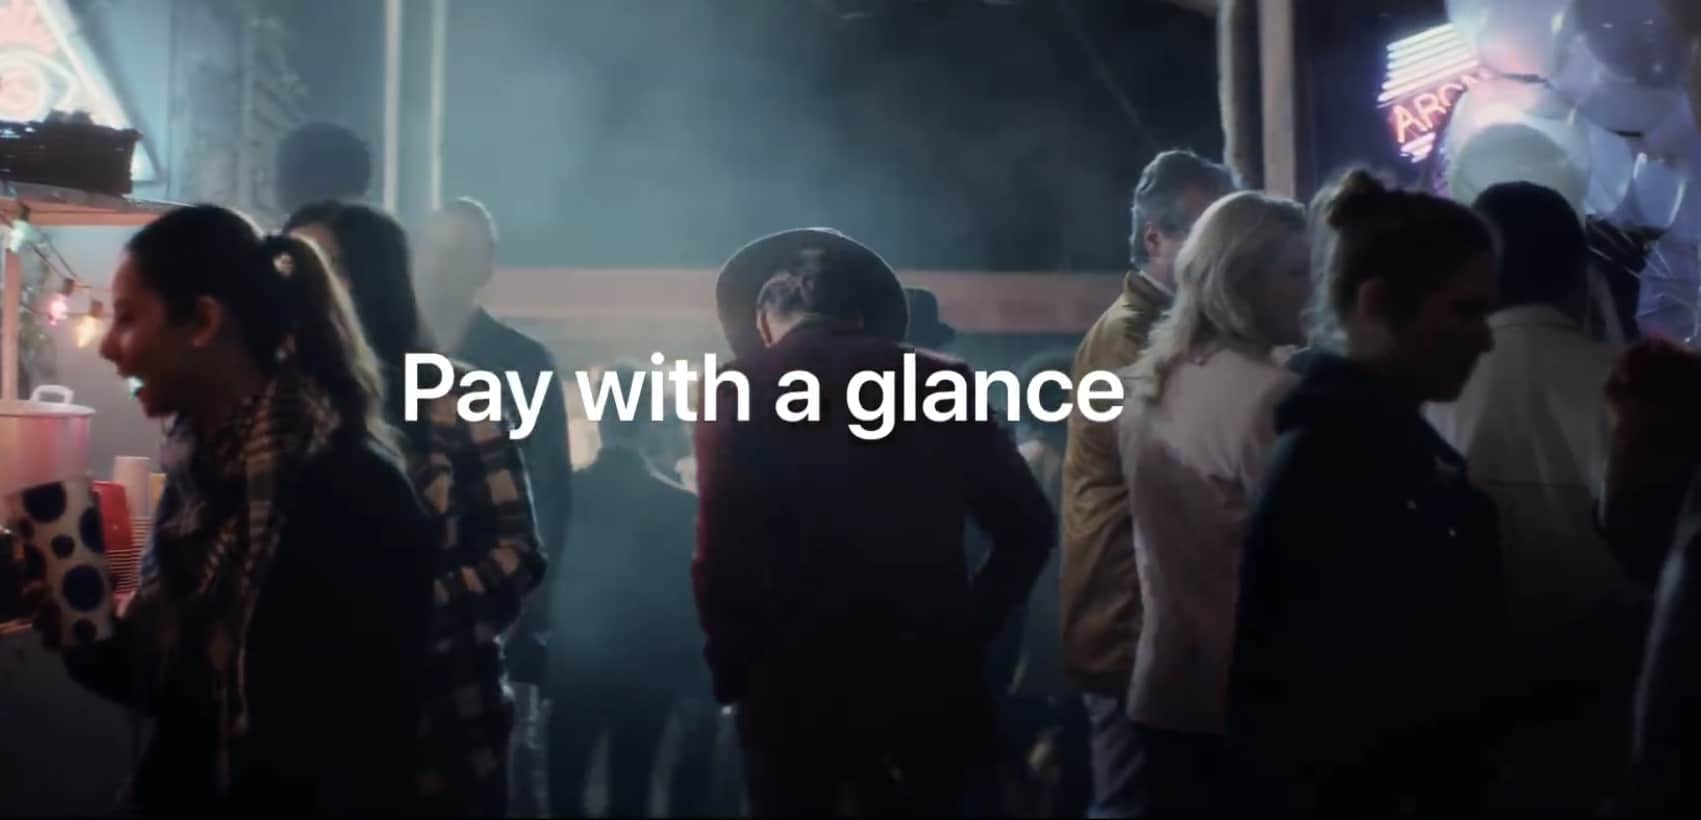 Apple Shares New 'Fly Market' iPhone X Video Focusing on Apple Pay